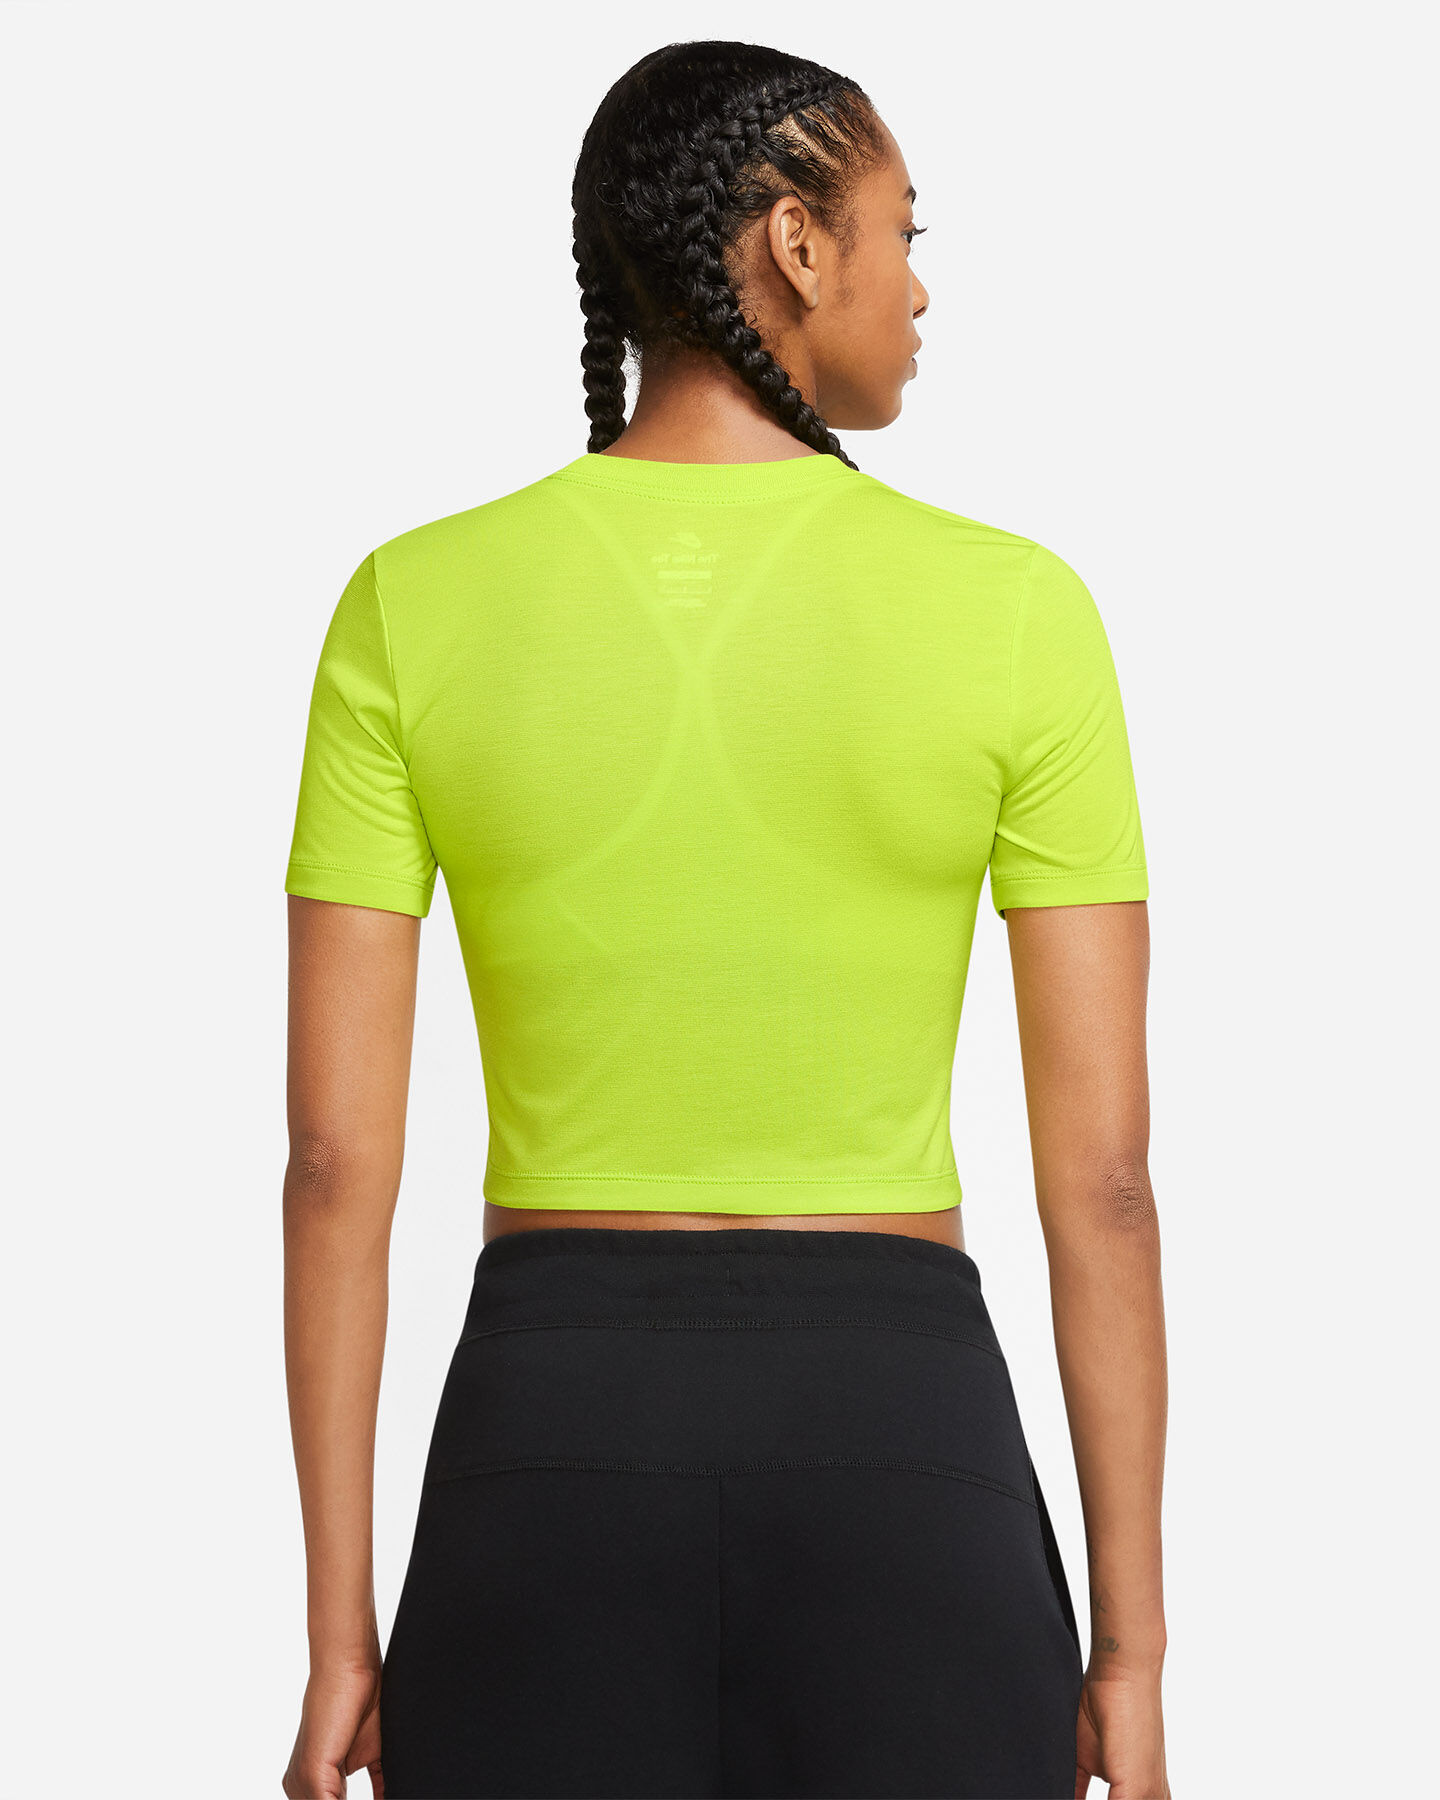  T-Shirt NIKE CROP AIR W S5433801|321|XS scatto 1